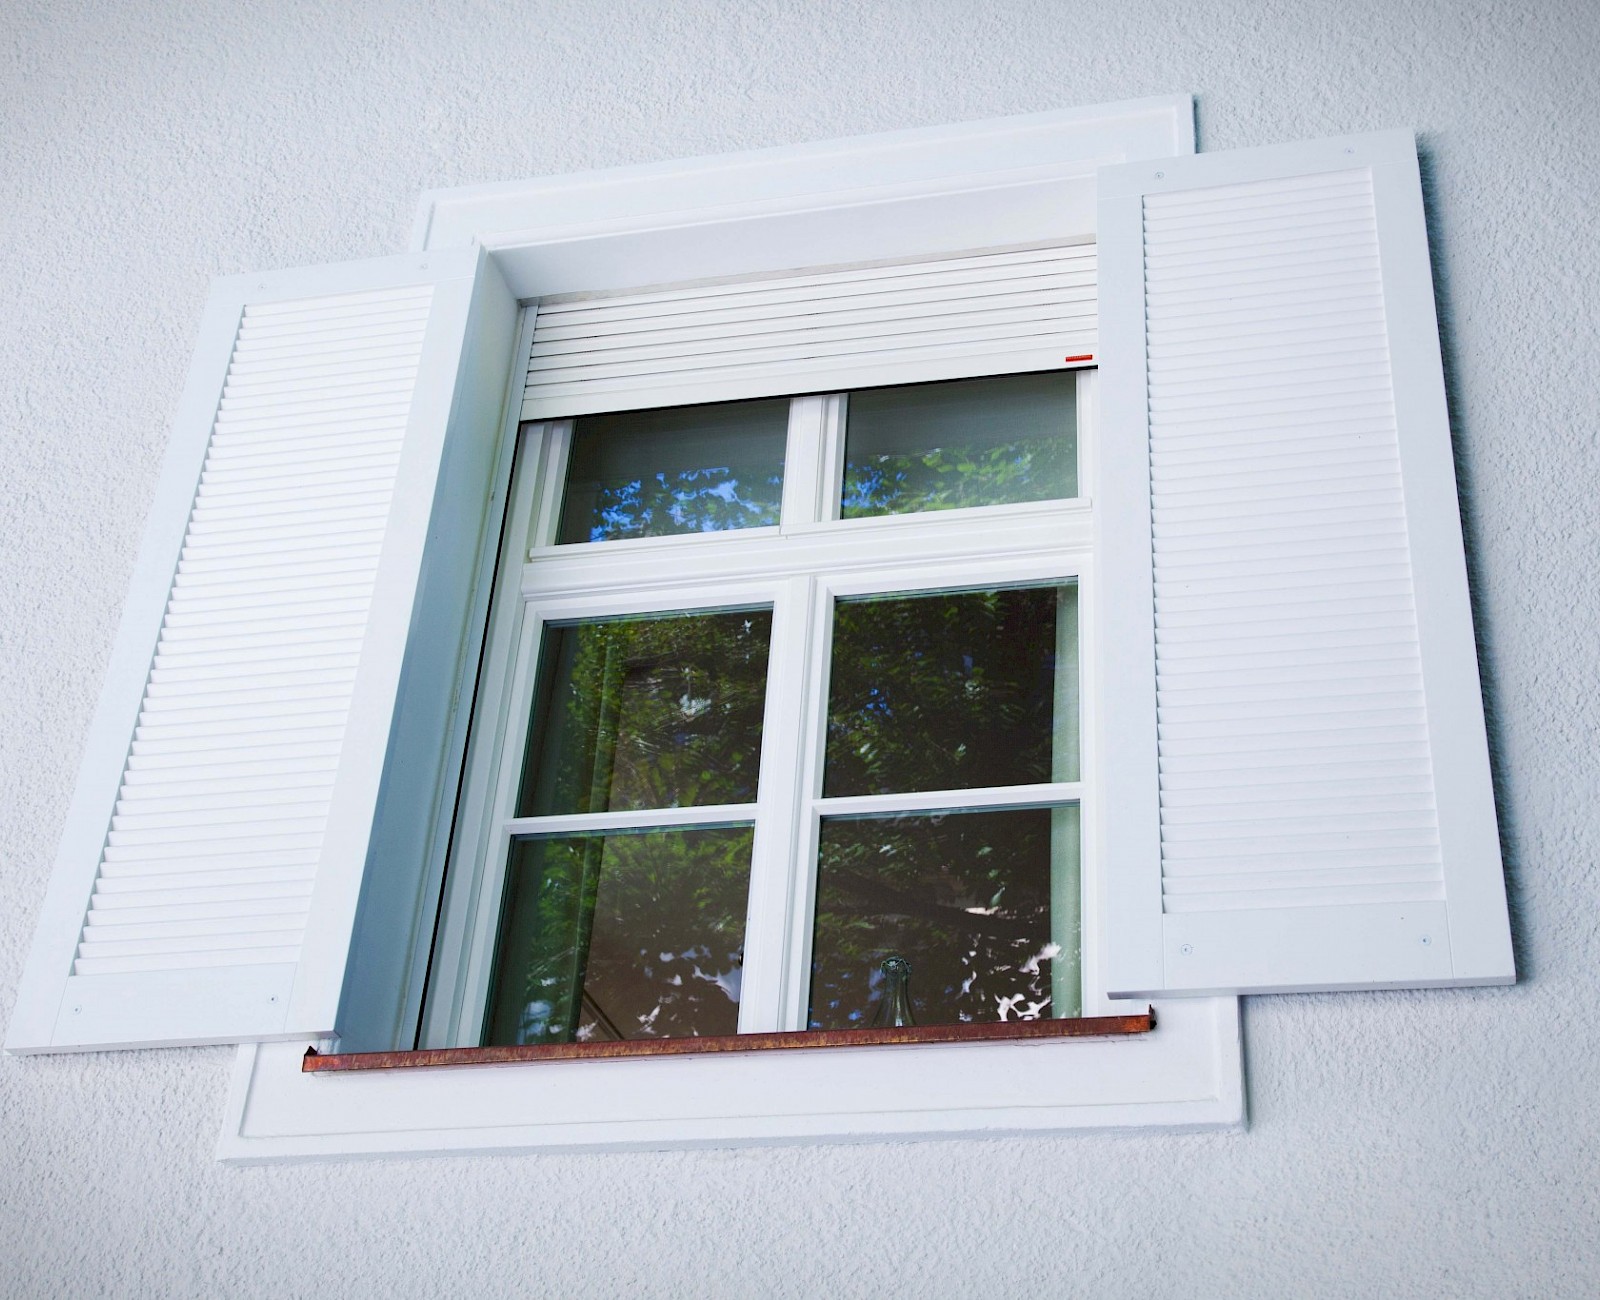 Windows with wooden folding shutters